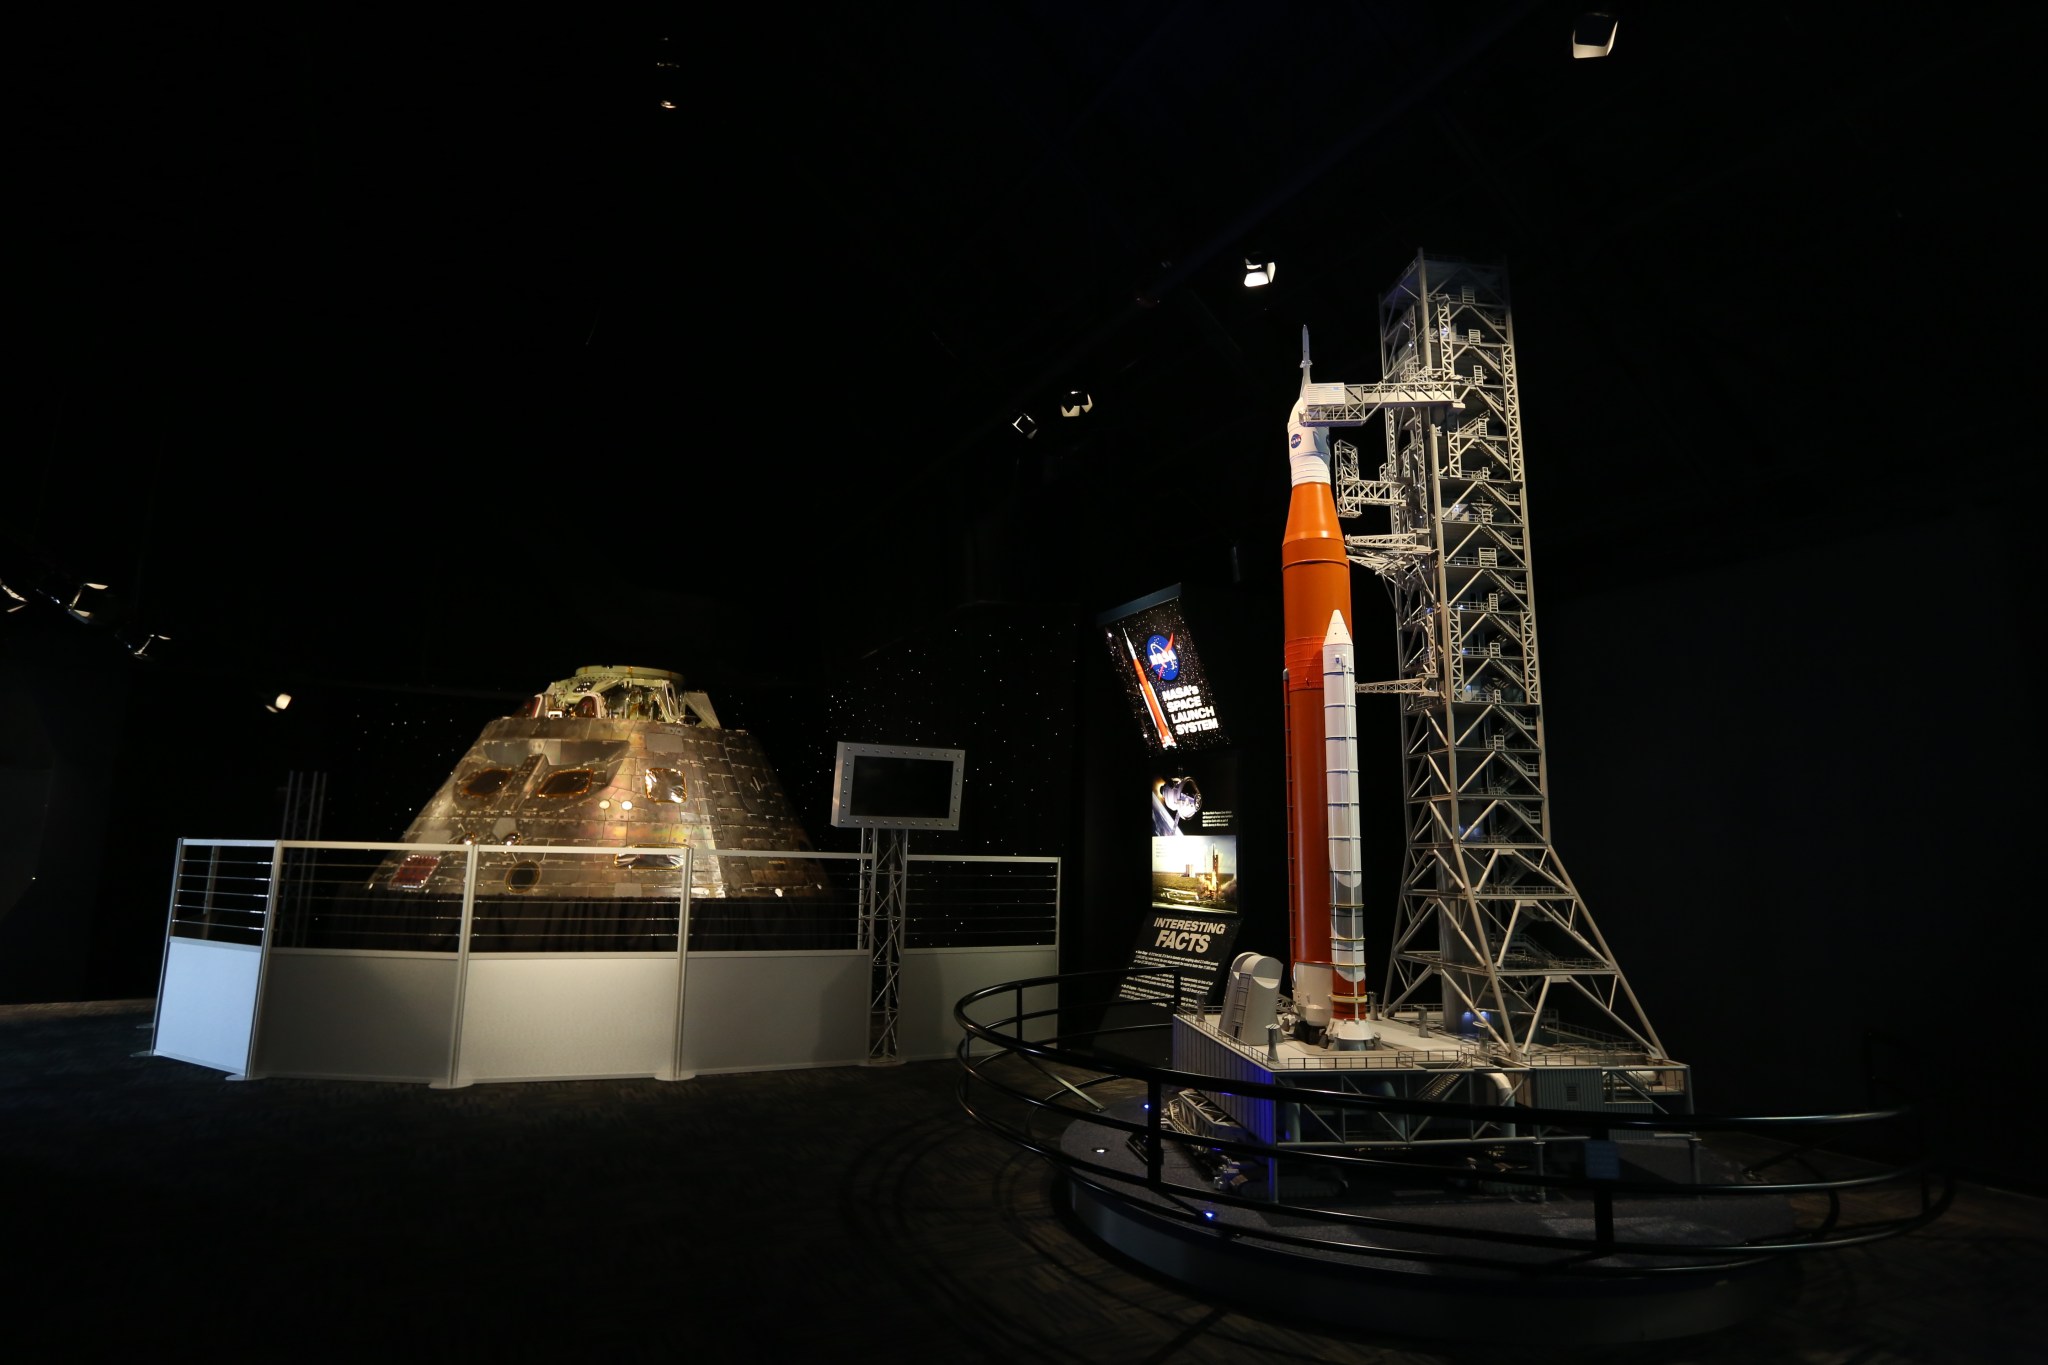 The Orion EFT-1 crew module is on display in the NASA Now exhibit at the Kennedy Space Center Visitor Complex.